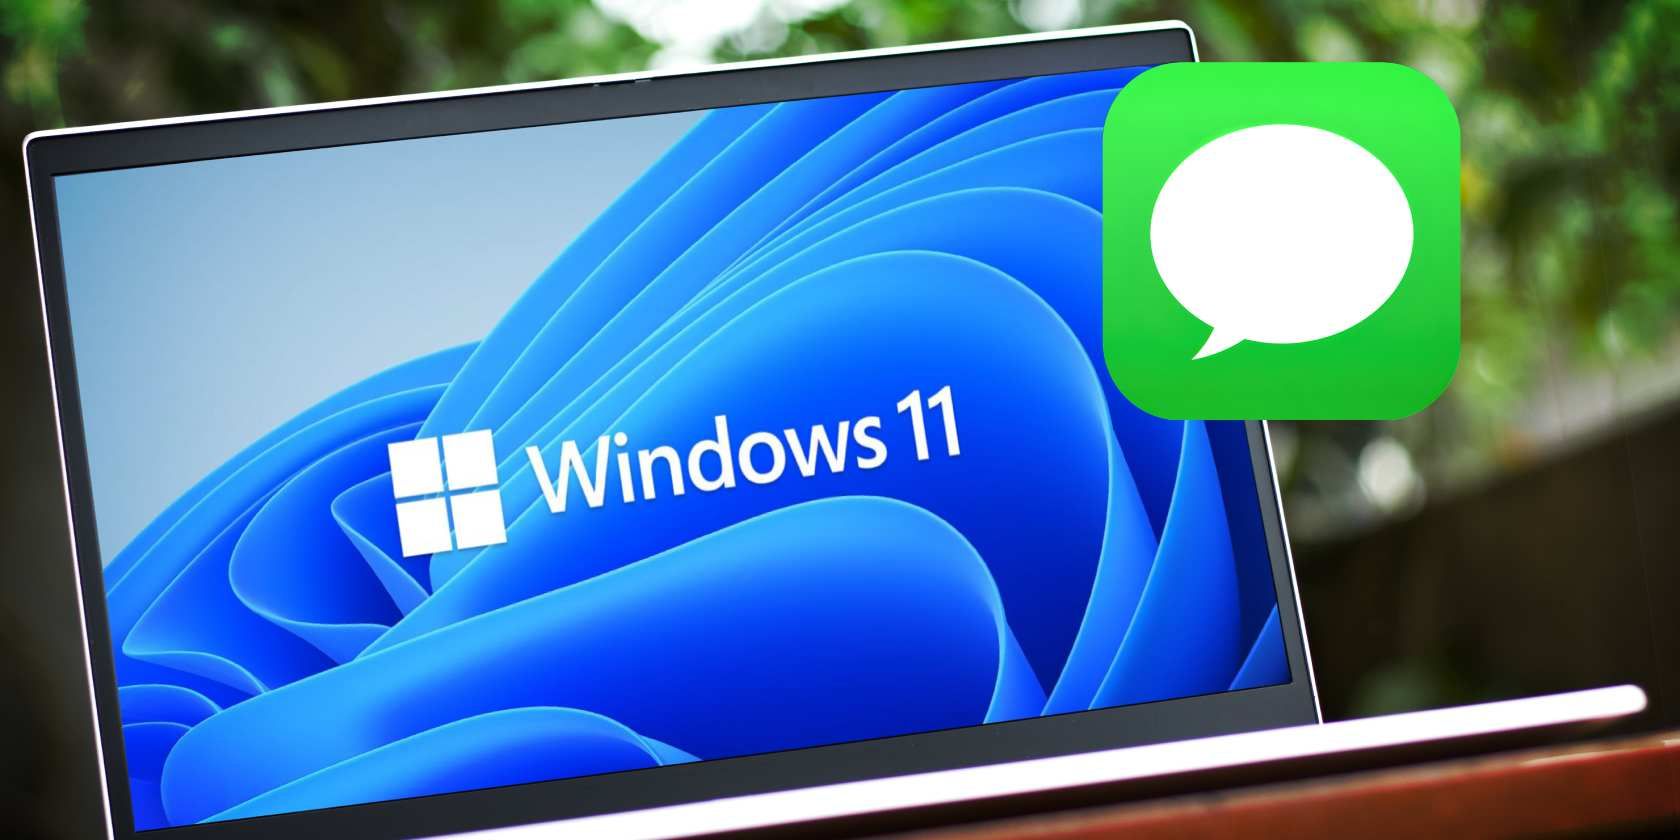 A laptop with Windows 11 wallpaper and an Imessage icon